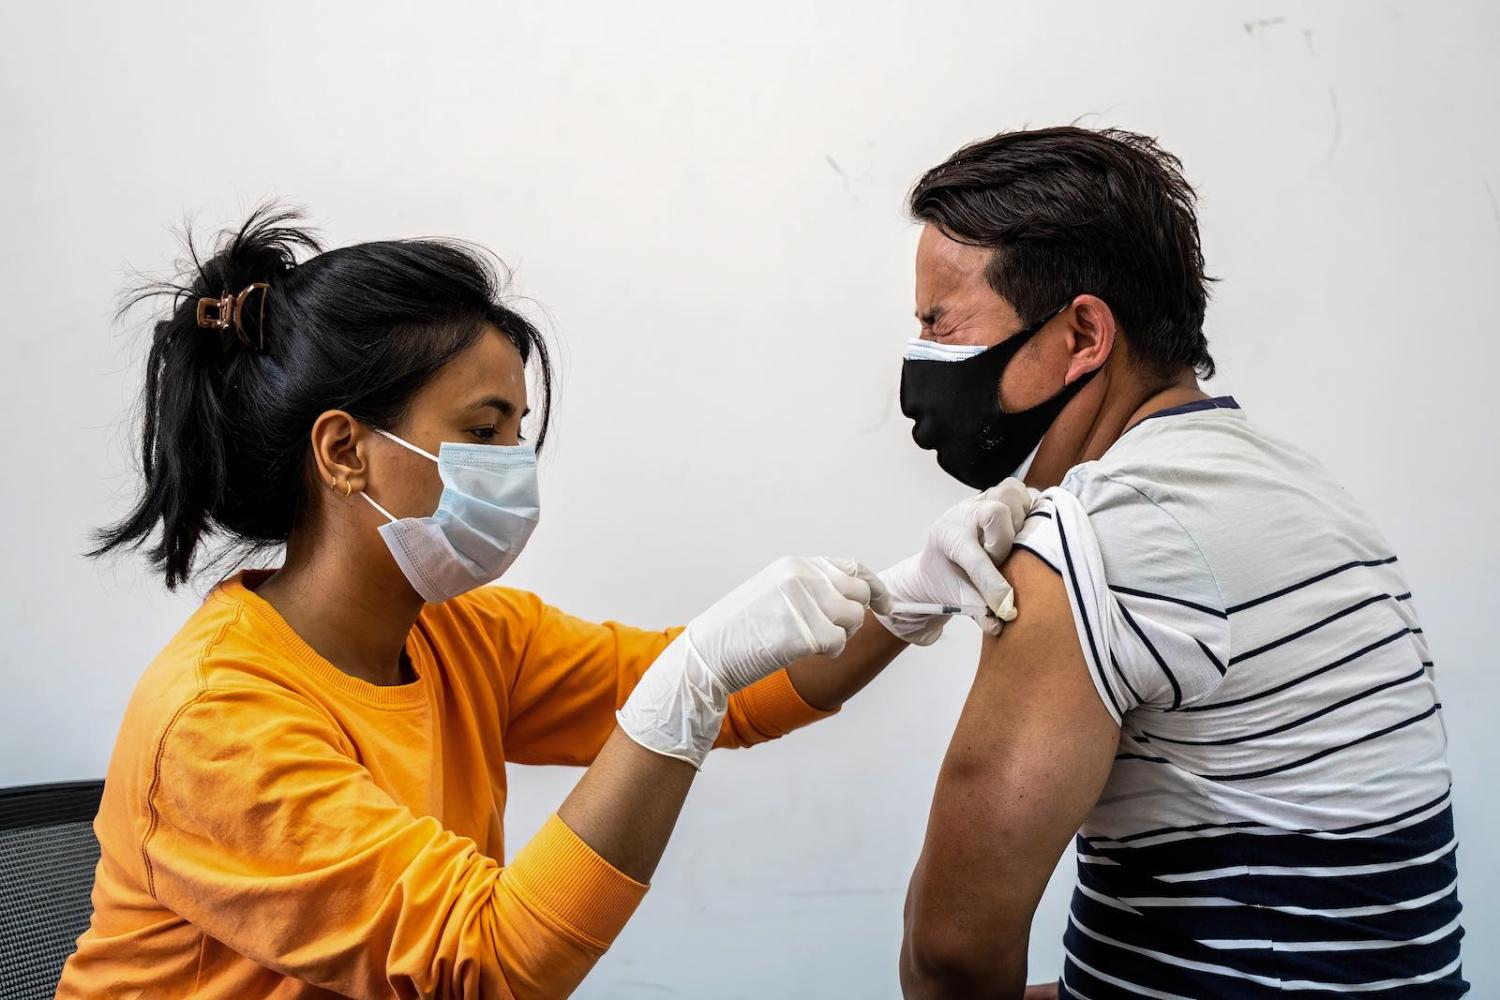 A Nepali man taking his first jab of Sinopharm vaccine at a health facility in Kathmandu, 26 April (Dipendra Rokka/SOPA Images/LightRocket via Getty Images)